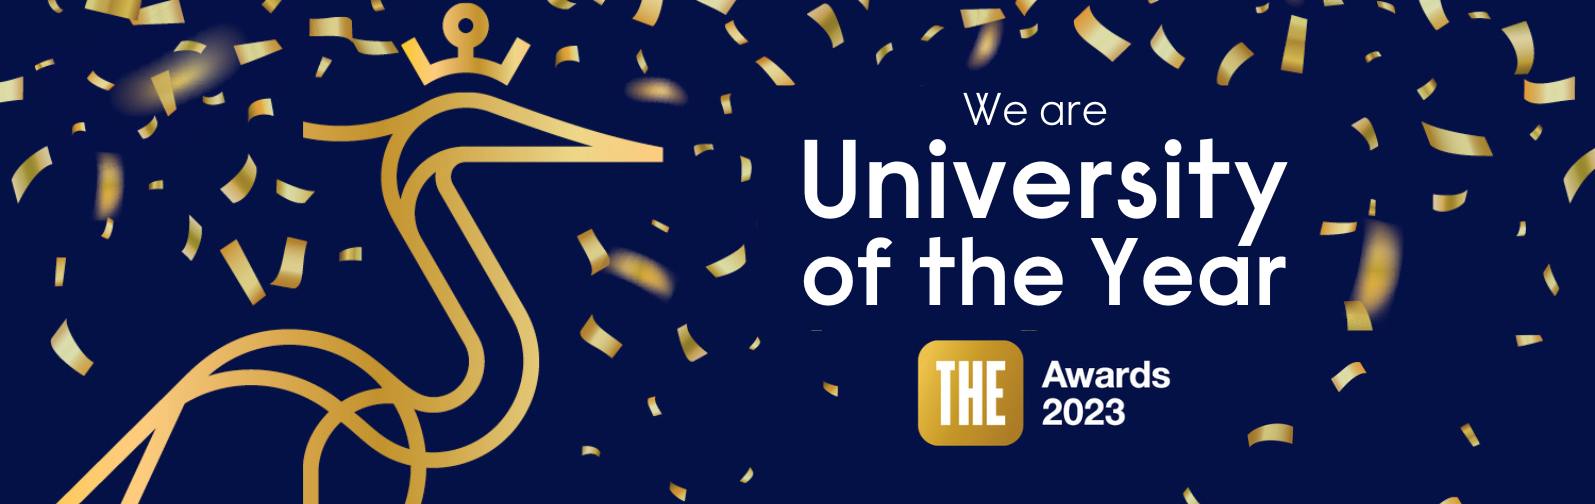 Anglia Ruskin University (ARU) is delighted to have been awarded the title of Times Higher Education University of the Year 2023